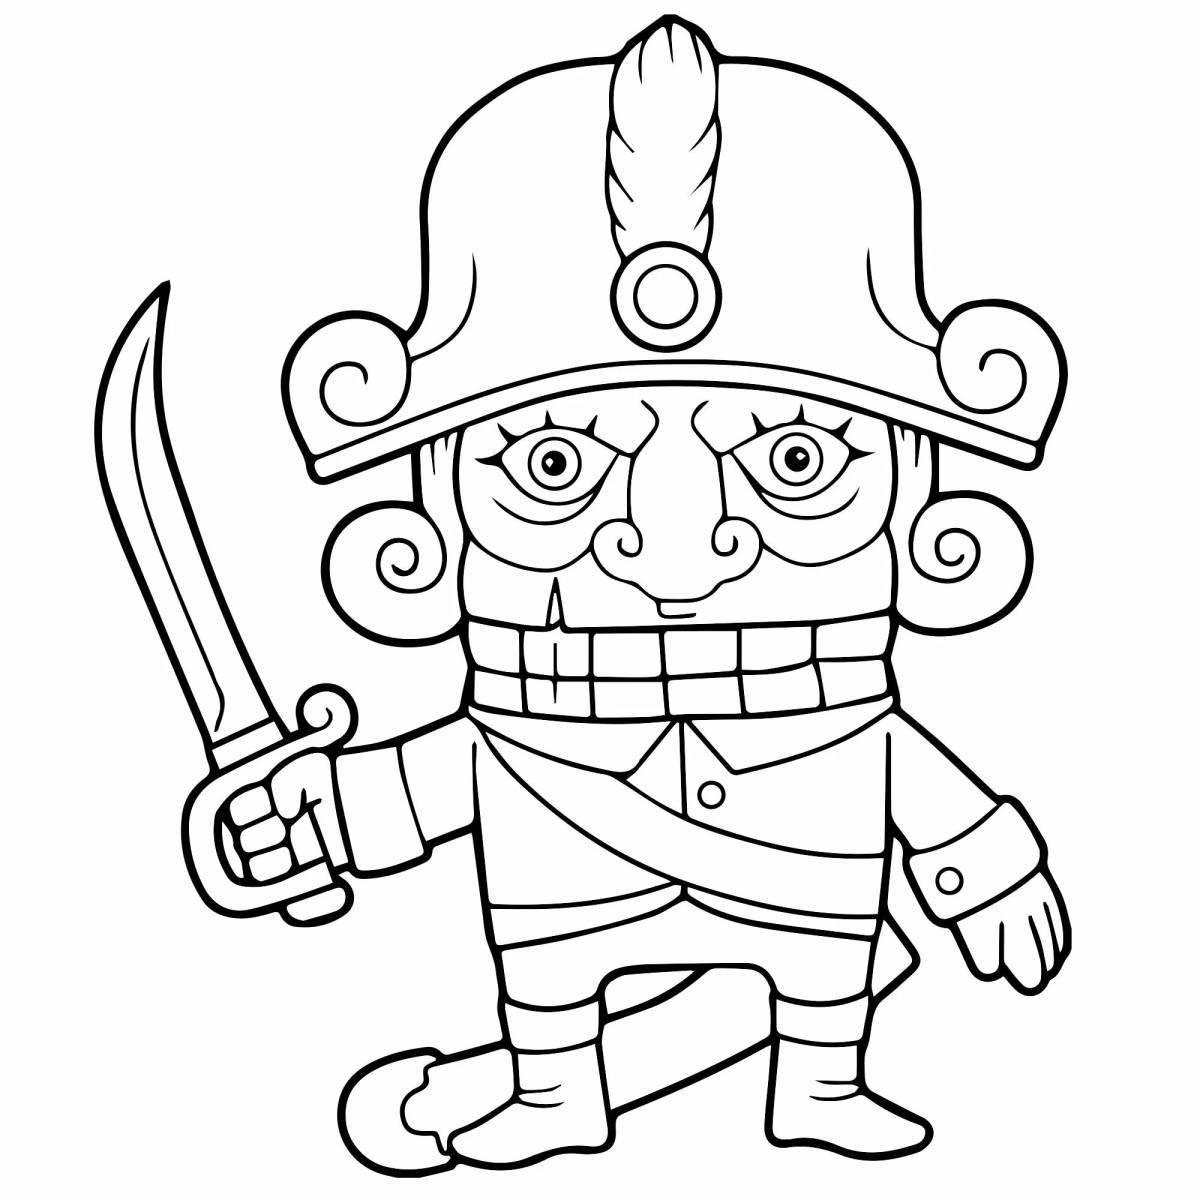 Coloring book funny nutcracker and mouse king